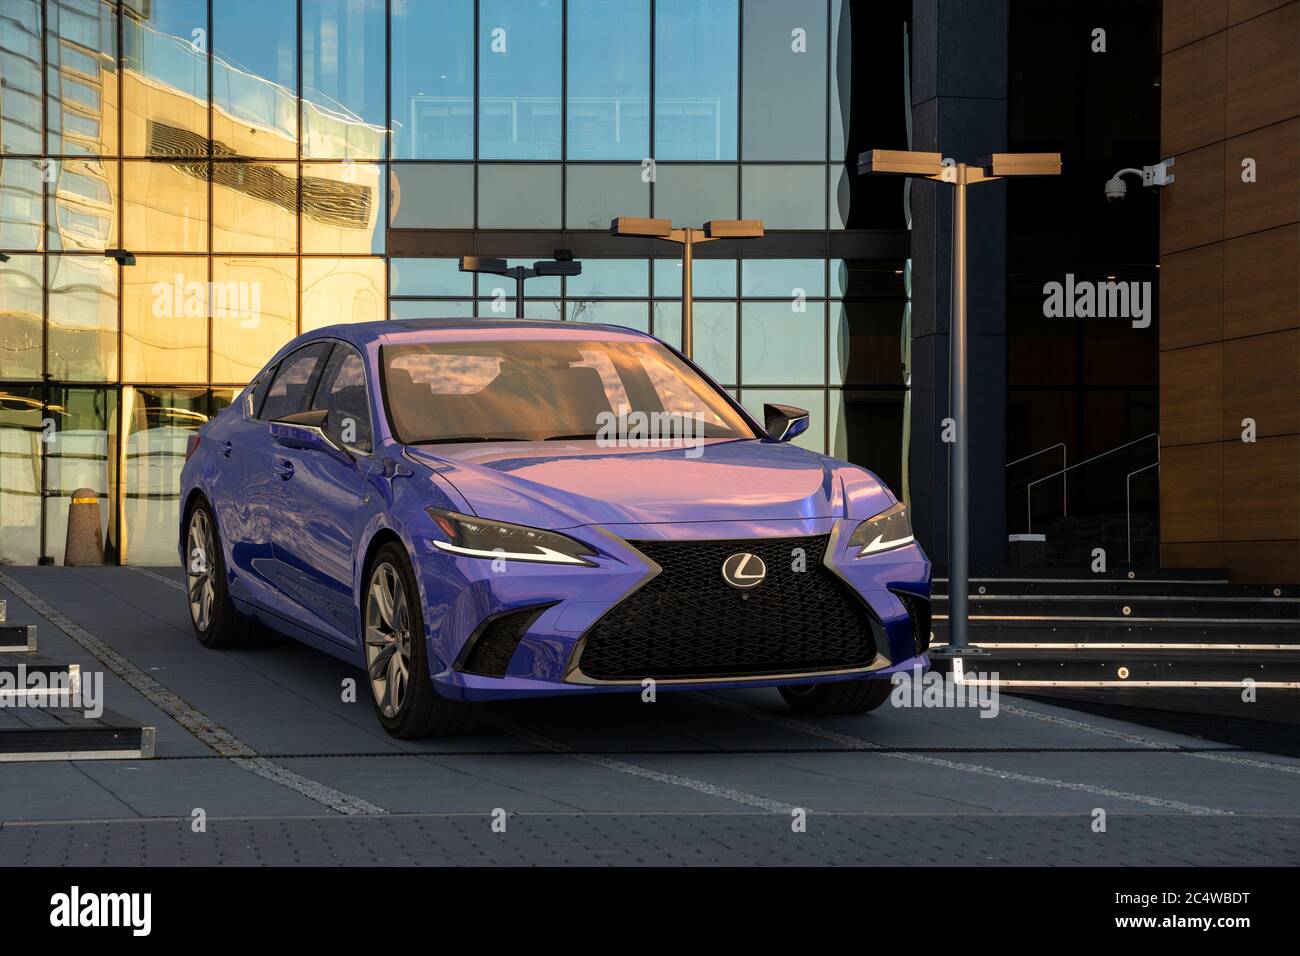 Lexus F-Sport sports limousine displayed in front of the salon Stock Photo